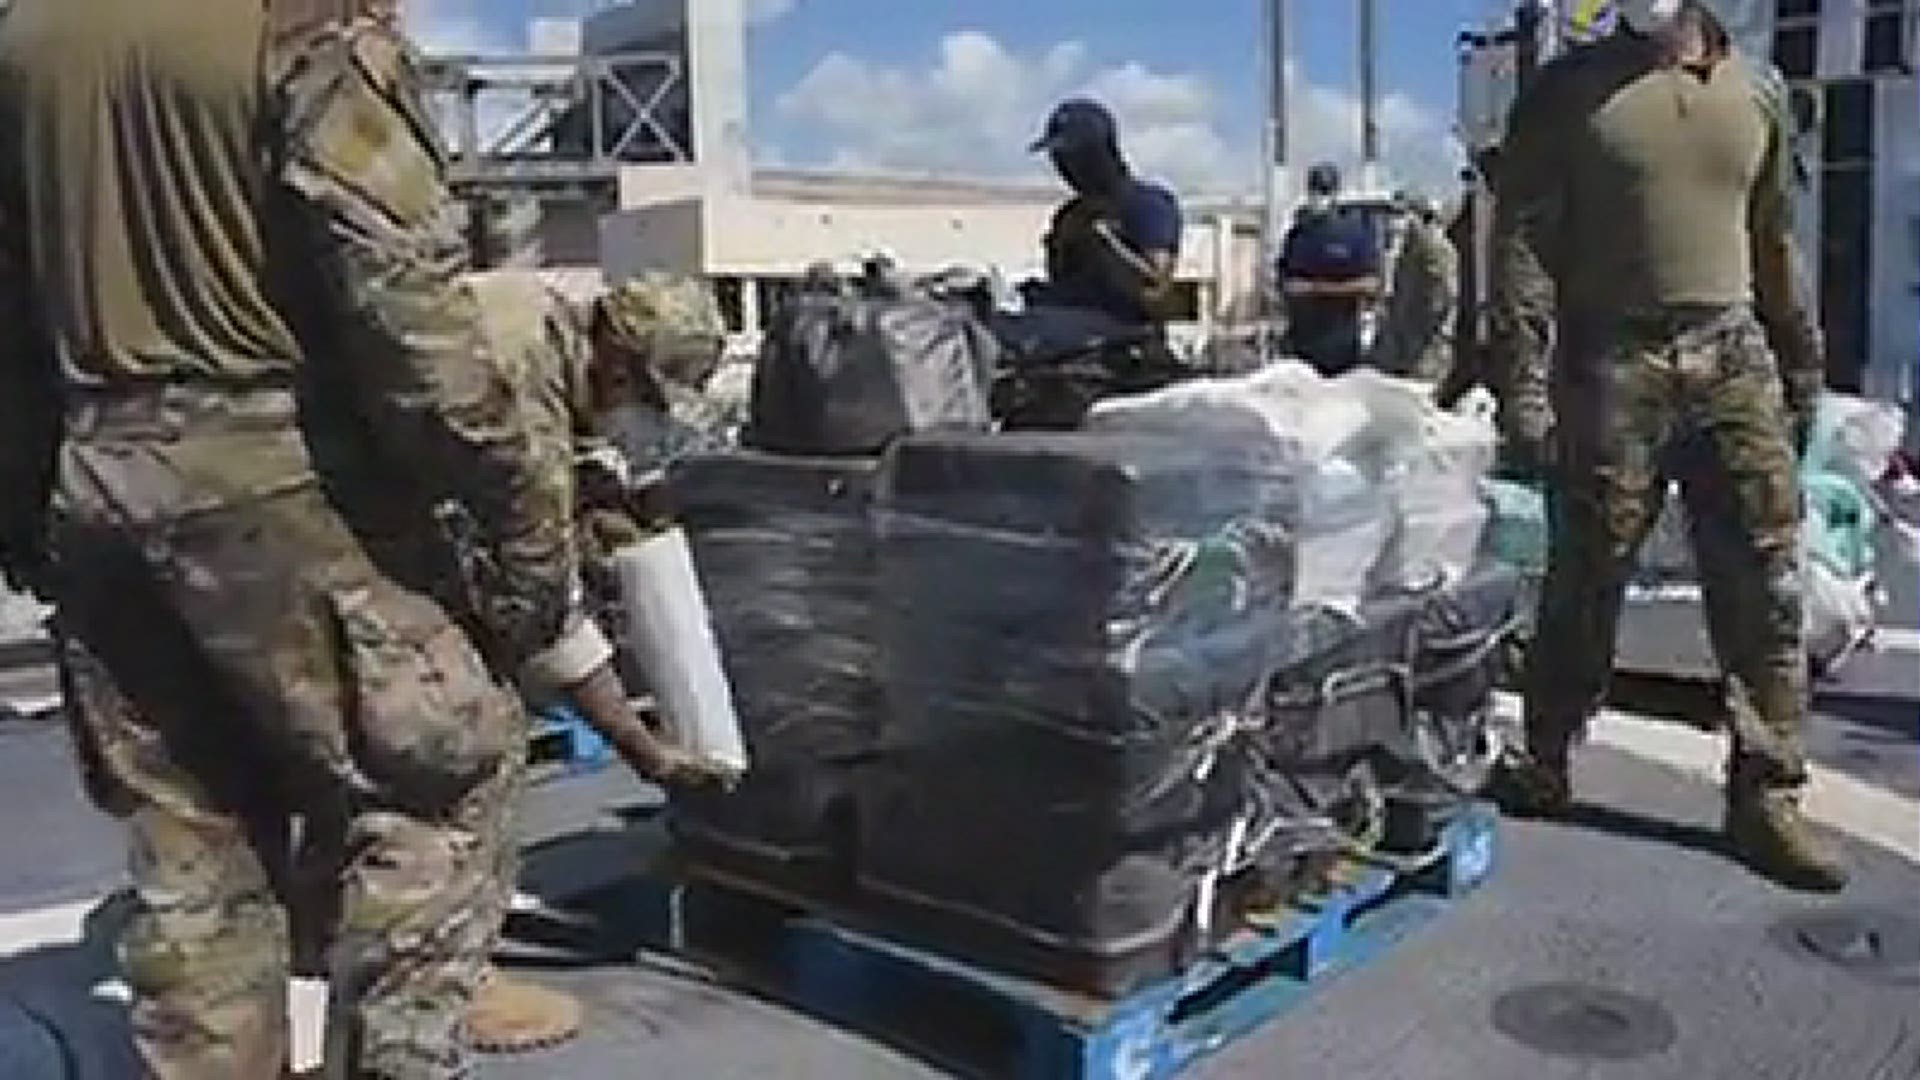 The US Coast Guard offloaded more than 6,800 pounds of cocaine.